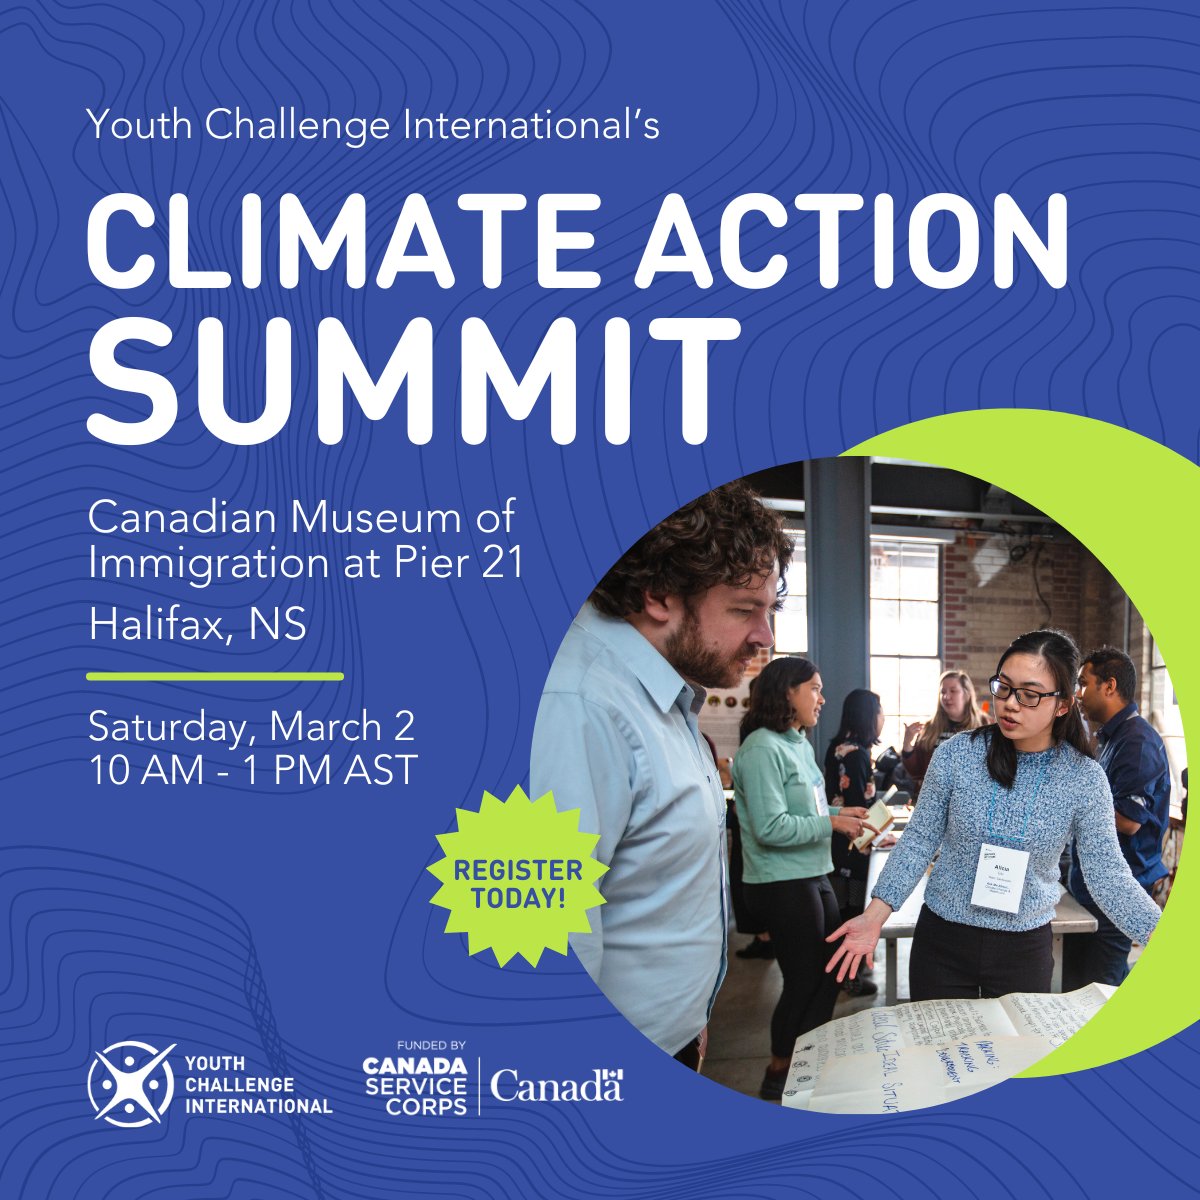 Join us for YCI’s Climate Action Summit in #Halifax! 🌎 Learn about #climateaction initiatives in the #HRM, explore opportunities to get involved and network with environmental leaders in the community. Register for free today ➡️ bit.ly/49kirqP #LeadersToday